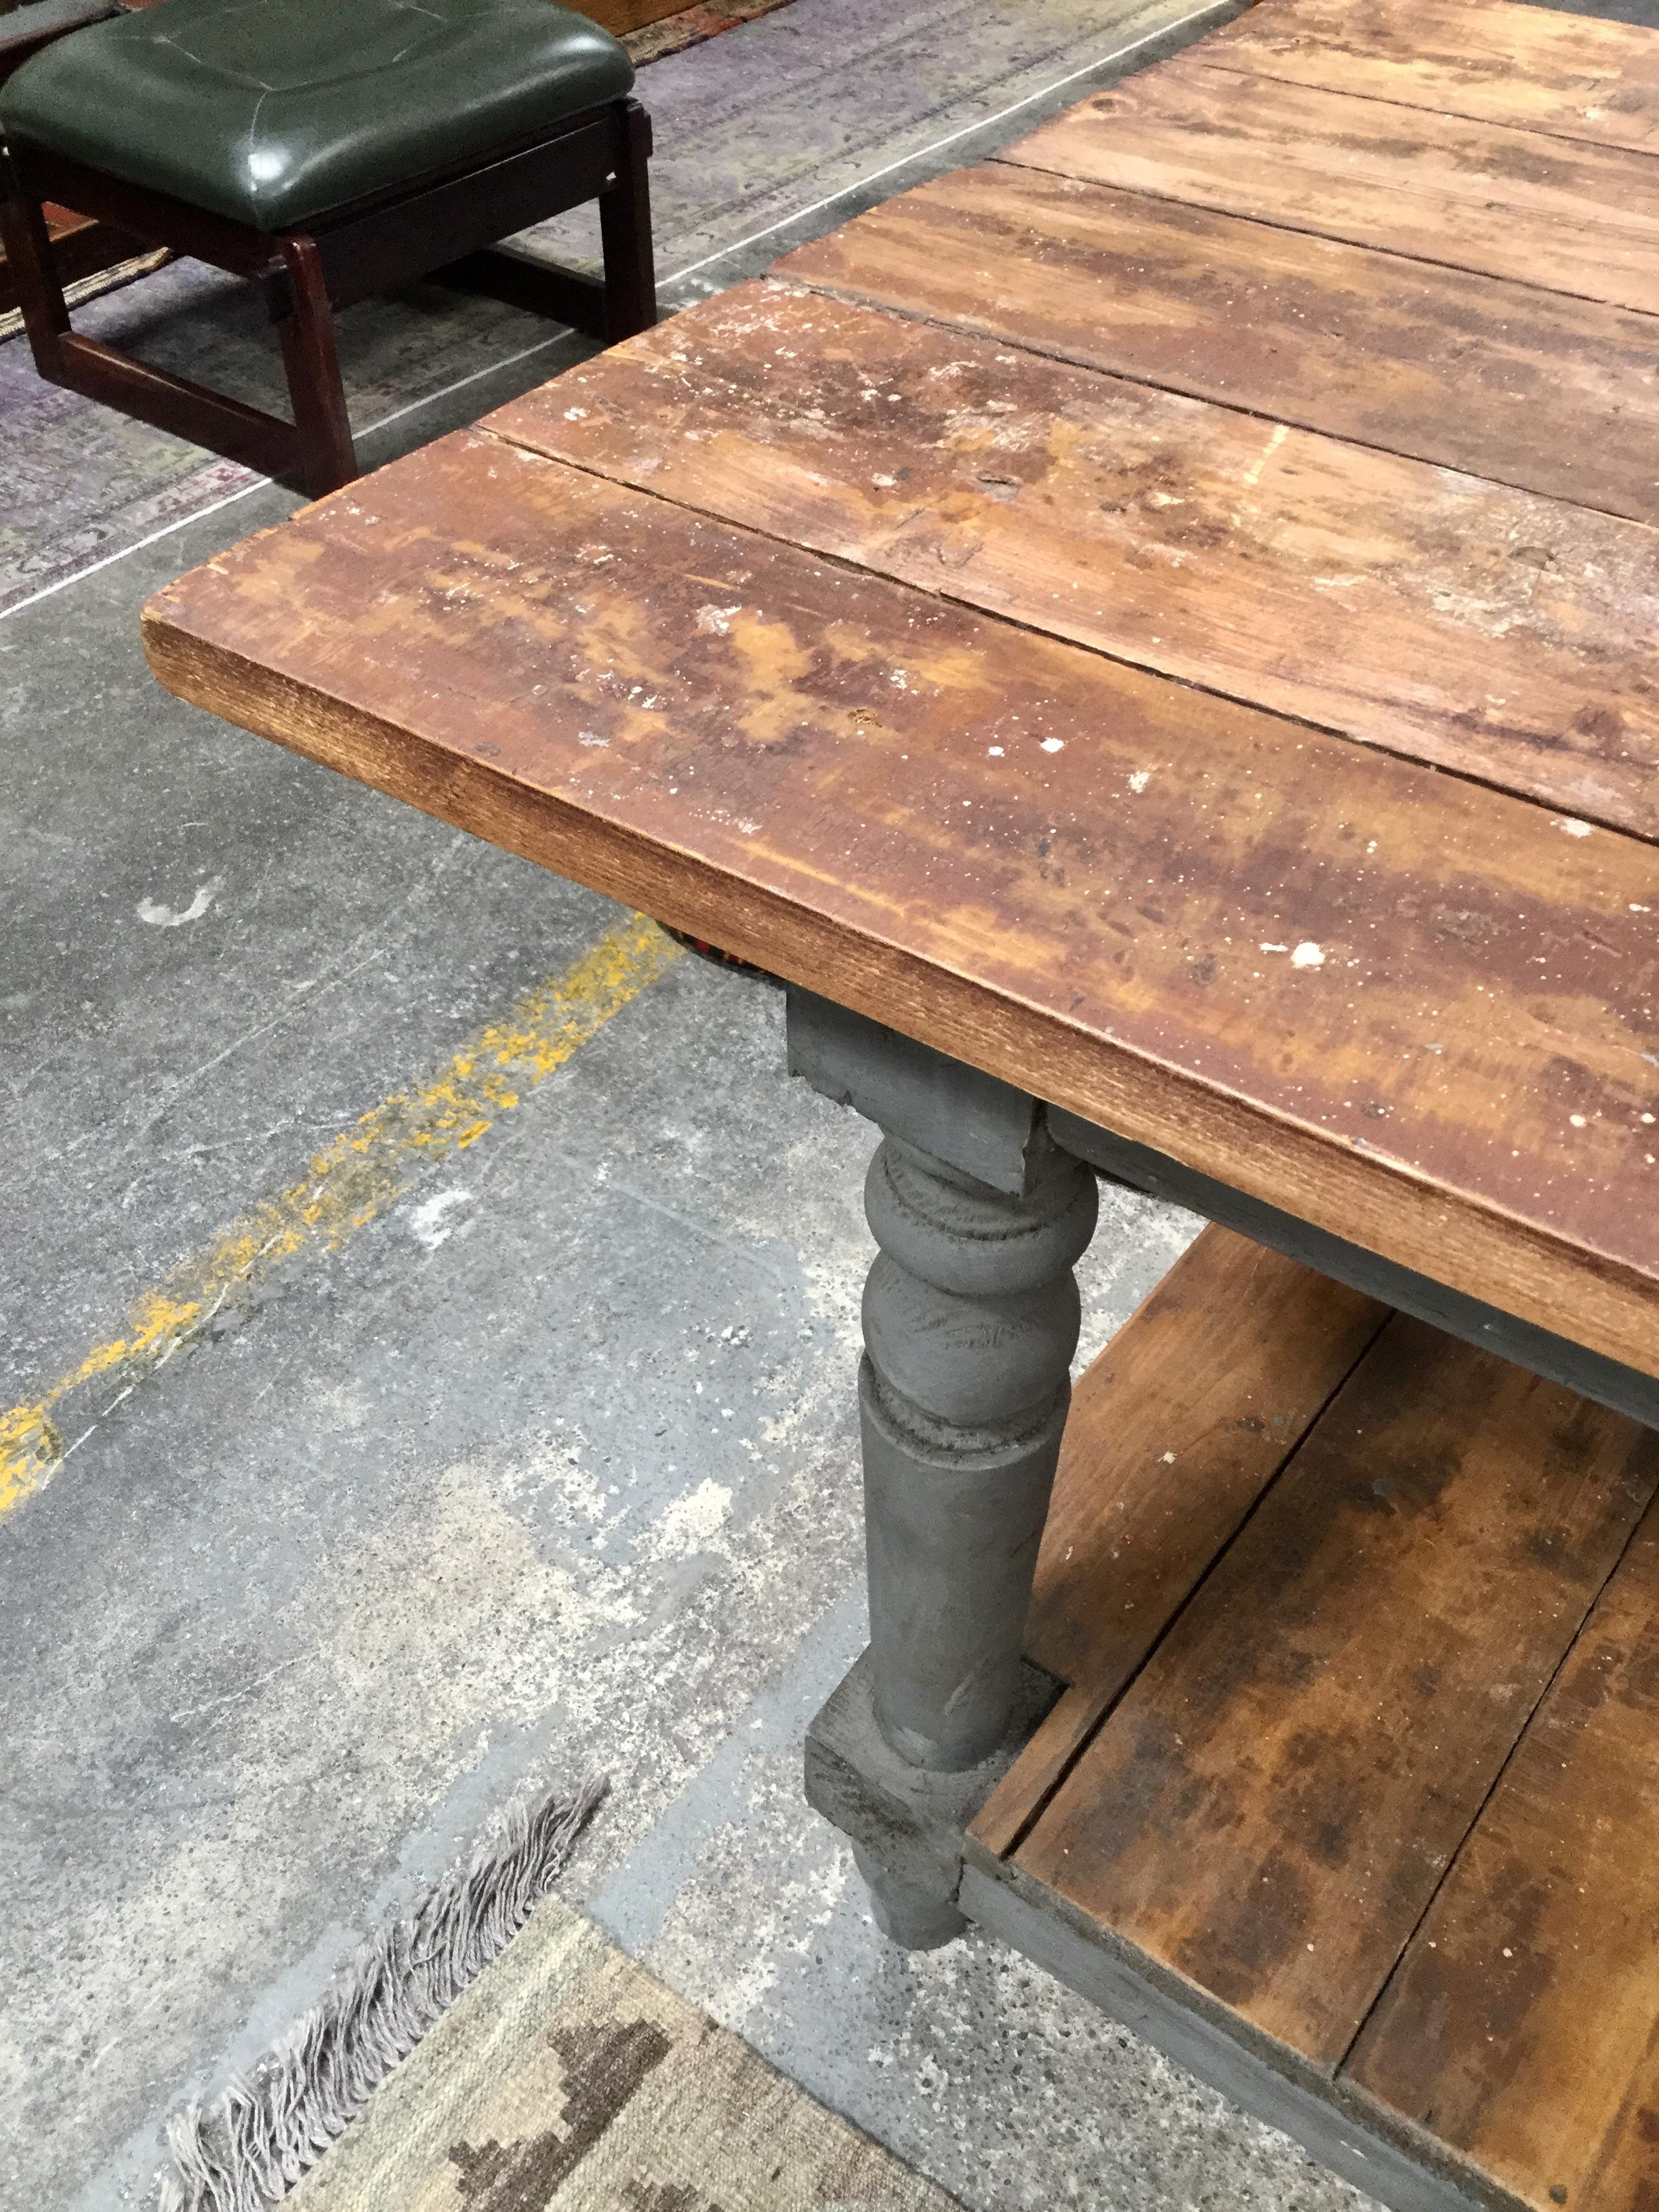 Rustic and hearty European farm table with lived-in character! Spacious wooden surface, ideal for group or large projects around the kitchen or garden. Please note, this is a special and aged item, and the surface shows plenty of proof of its past